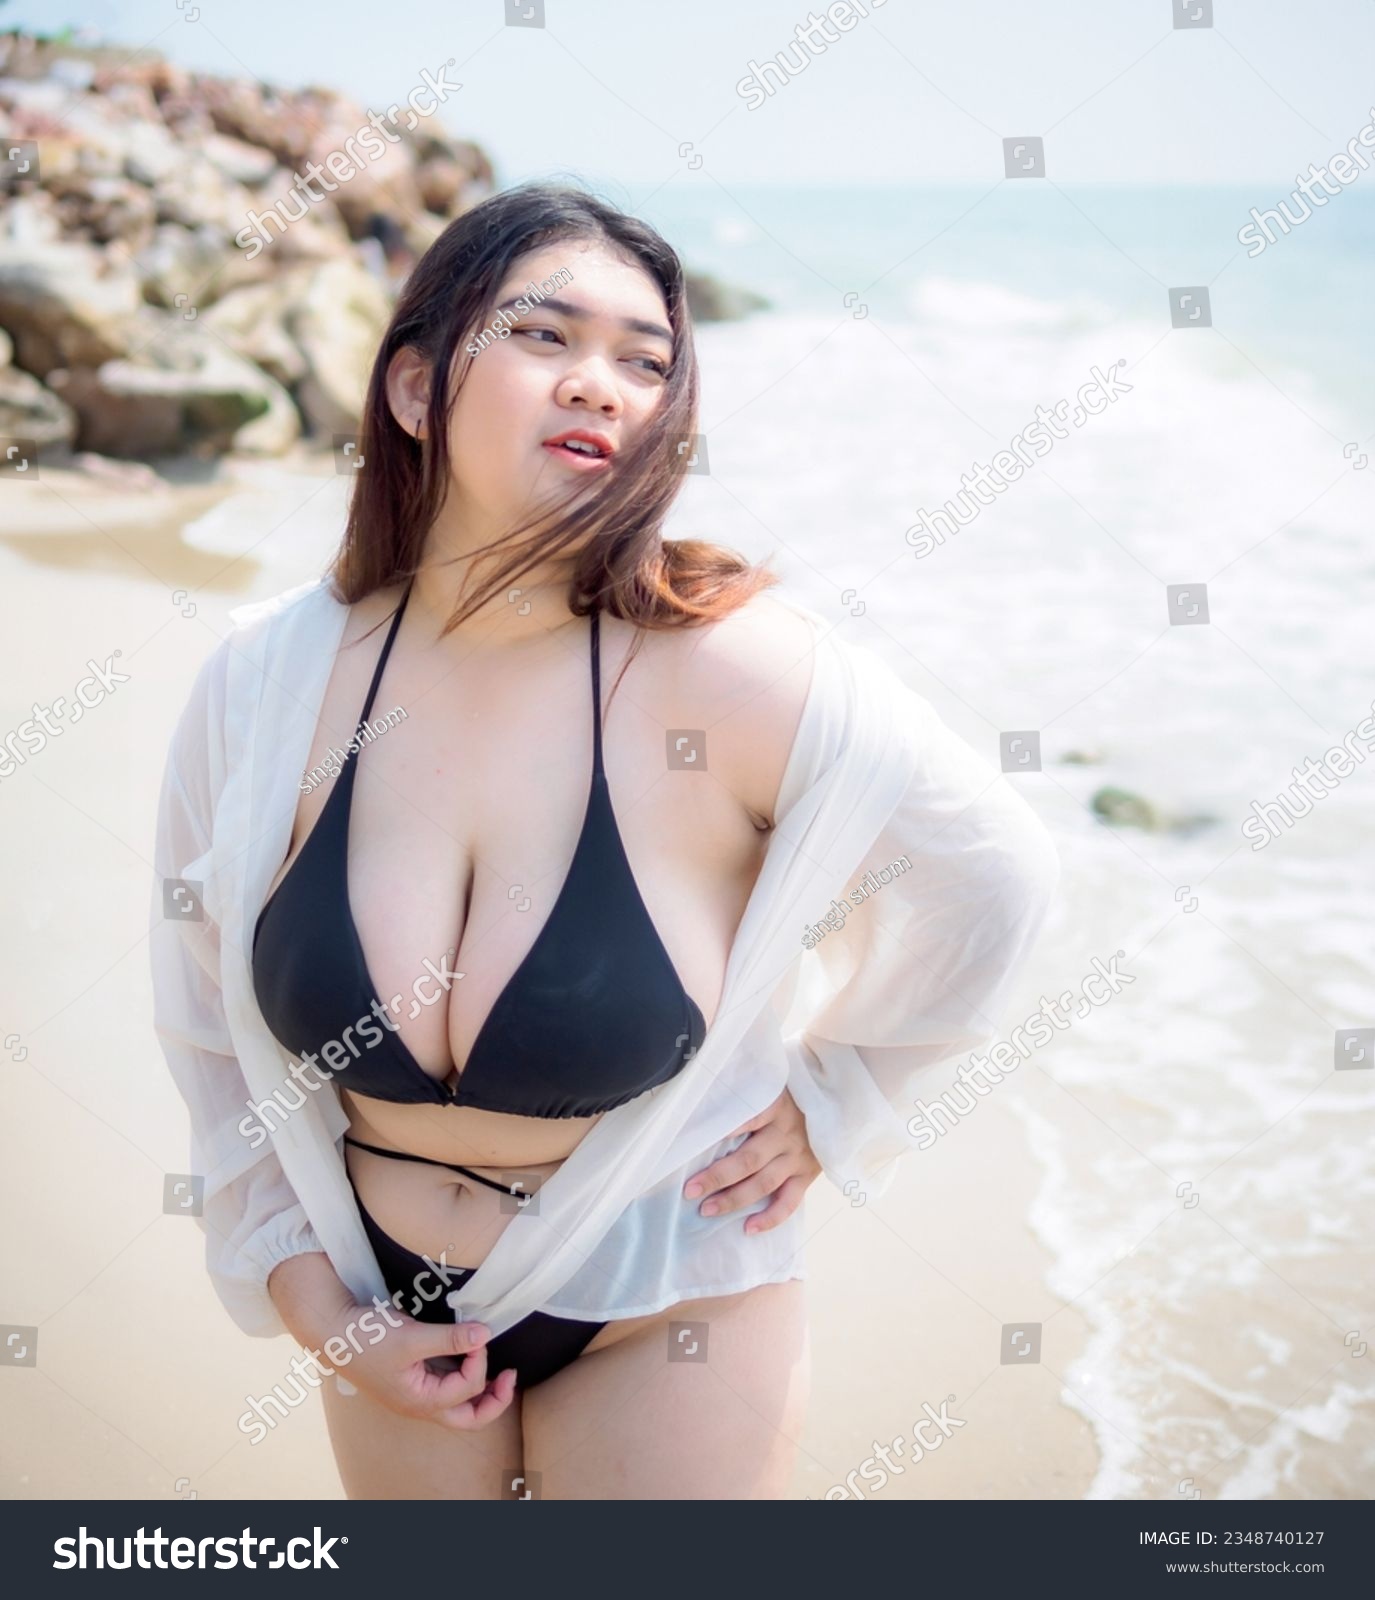 dana treadway recommends sexy chubby asian women pic